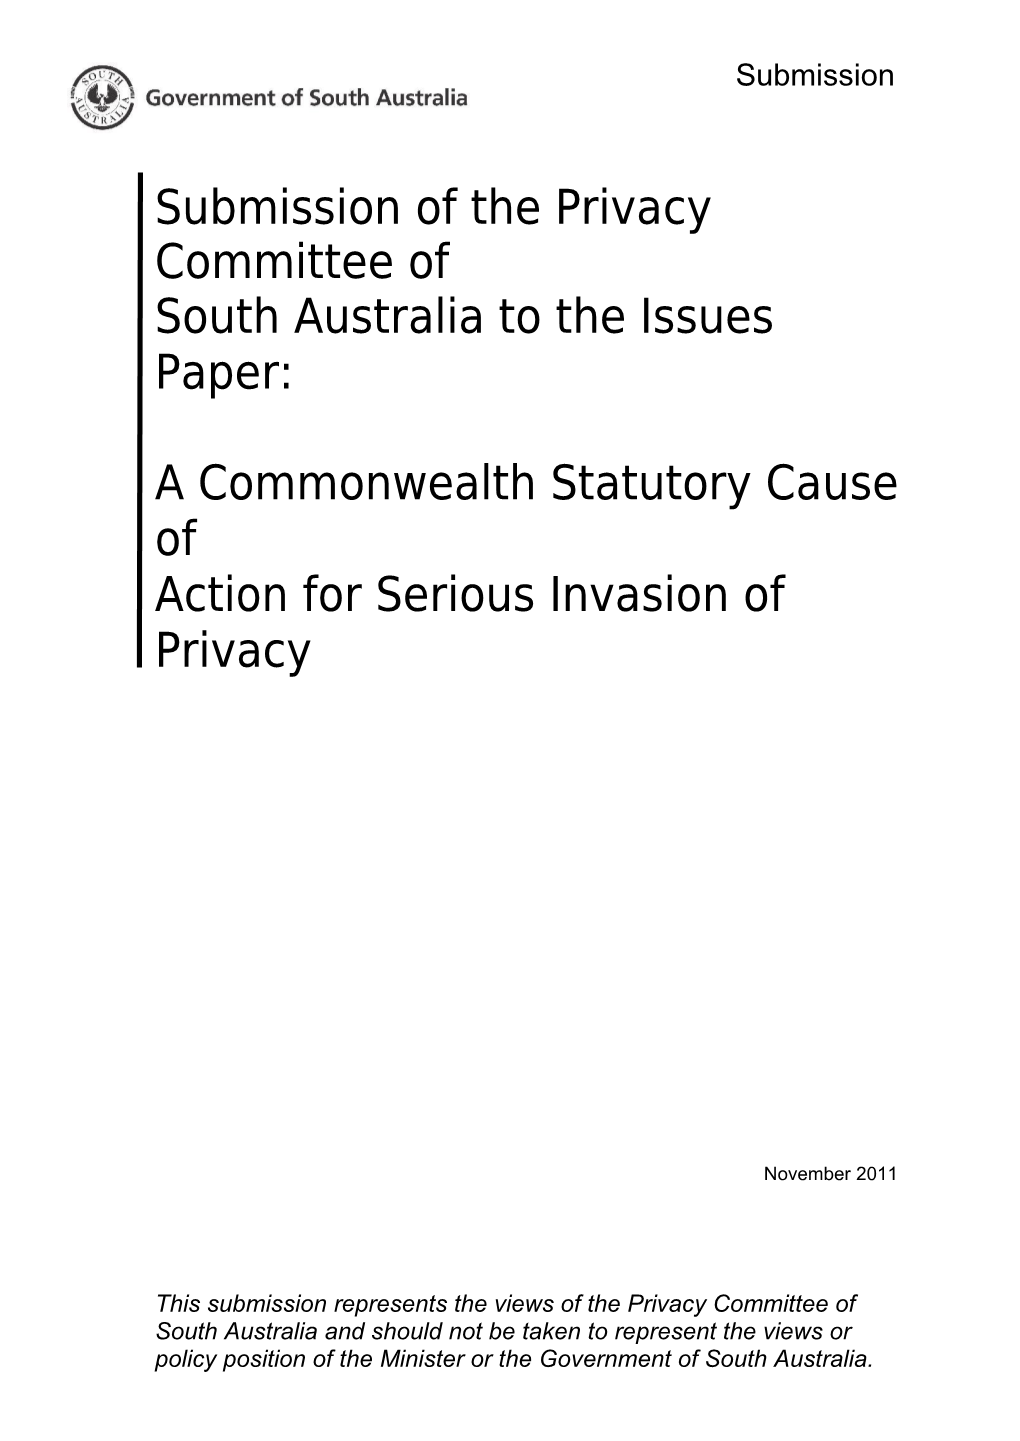 Submission - Right to Sue for Serious Invasion of Personal Privacy - Privacy Committee of SA